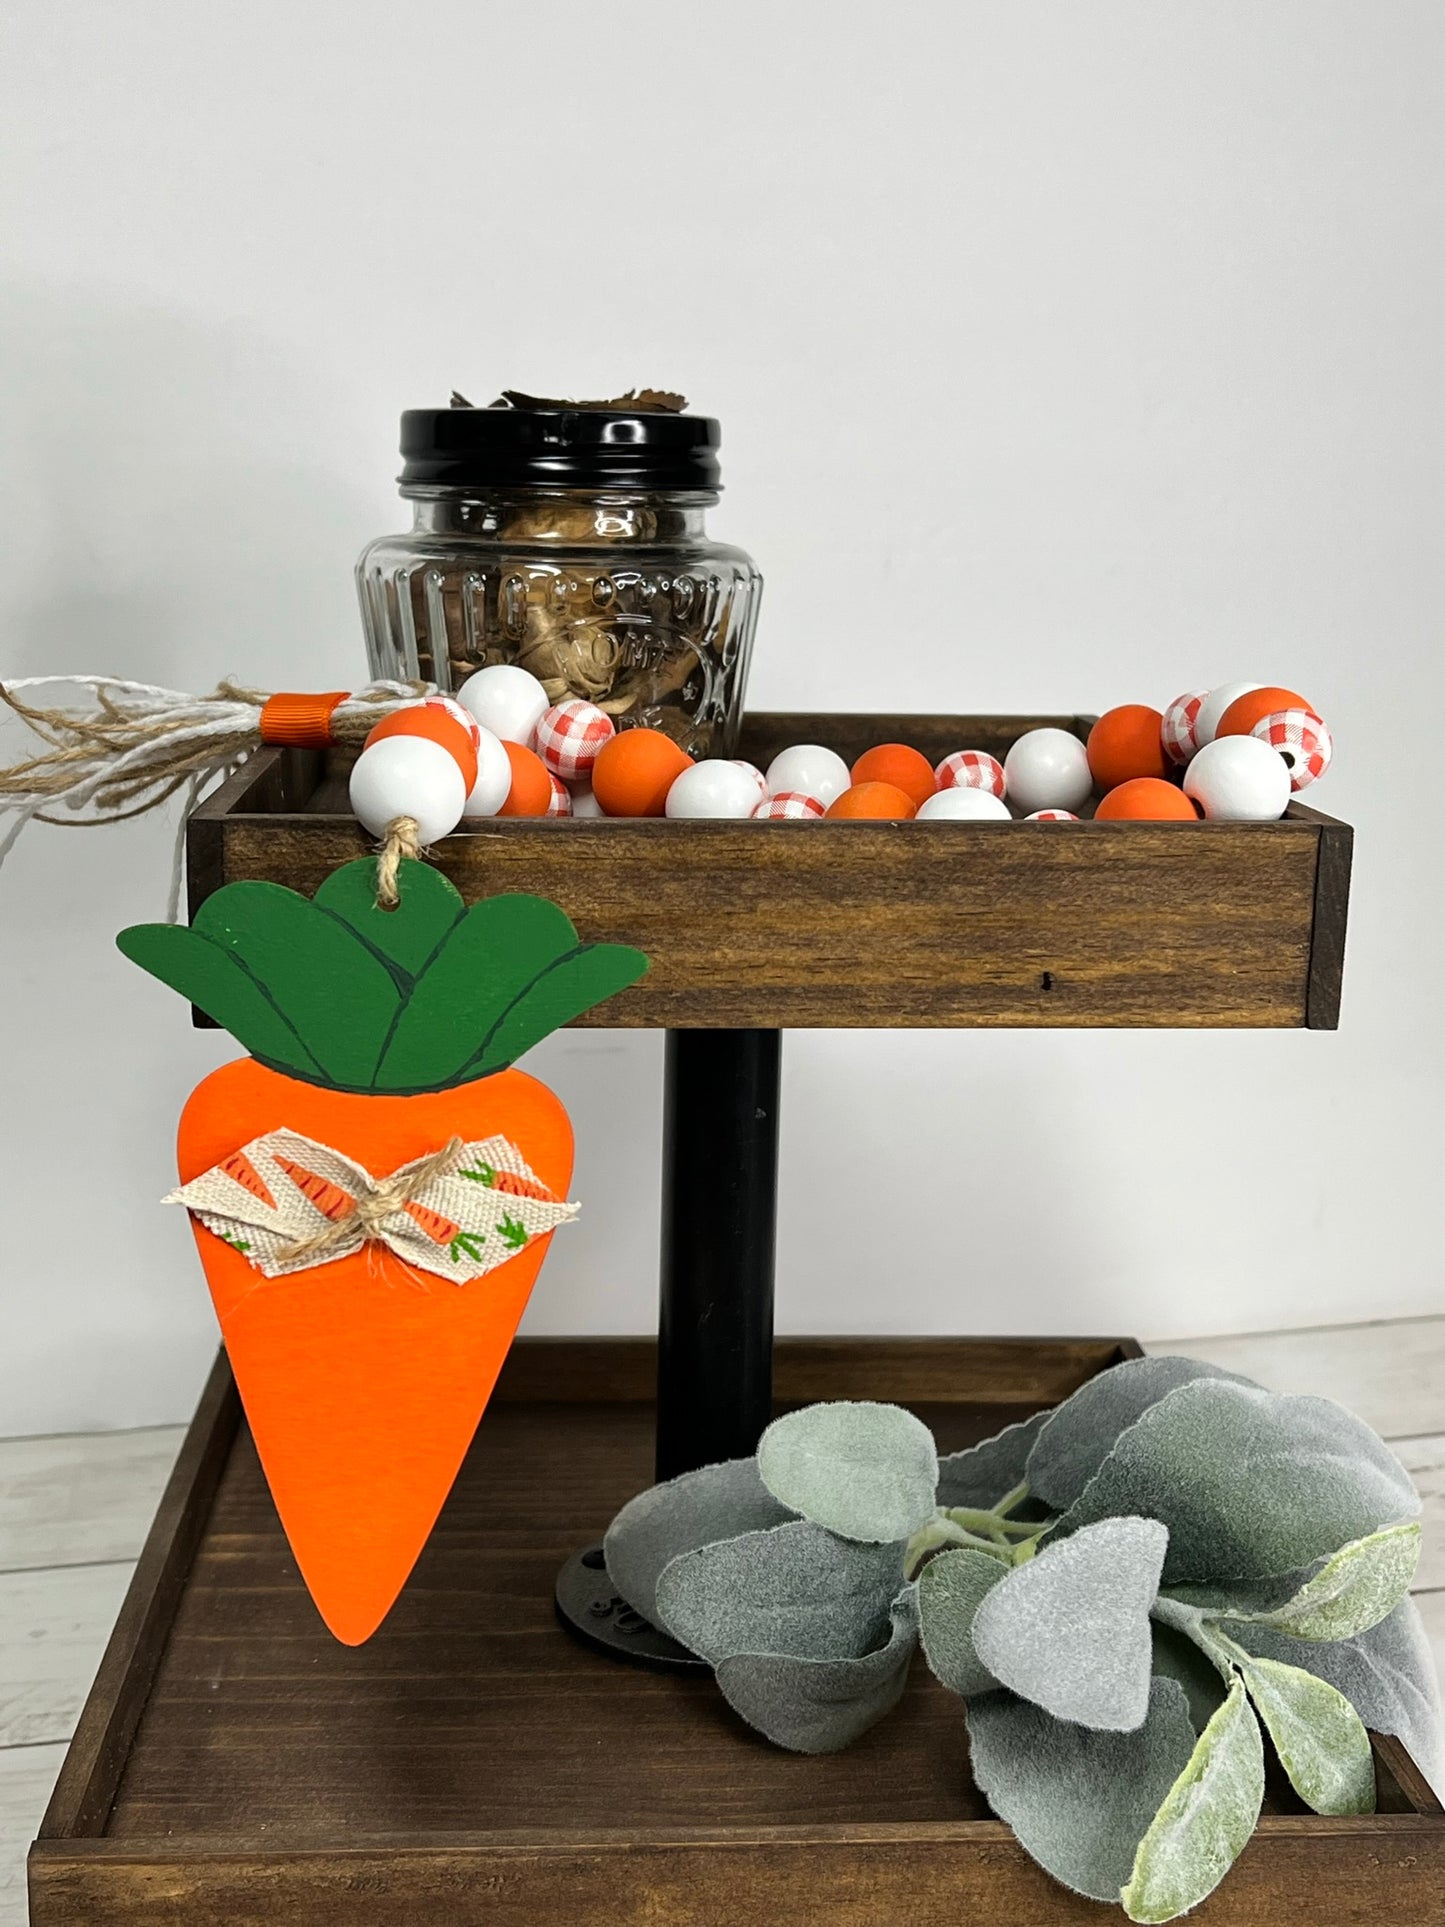 Carrot Beaded Garland with Tassel